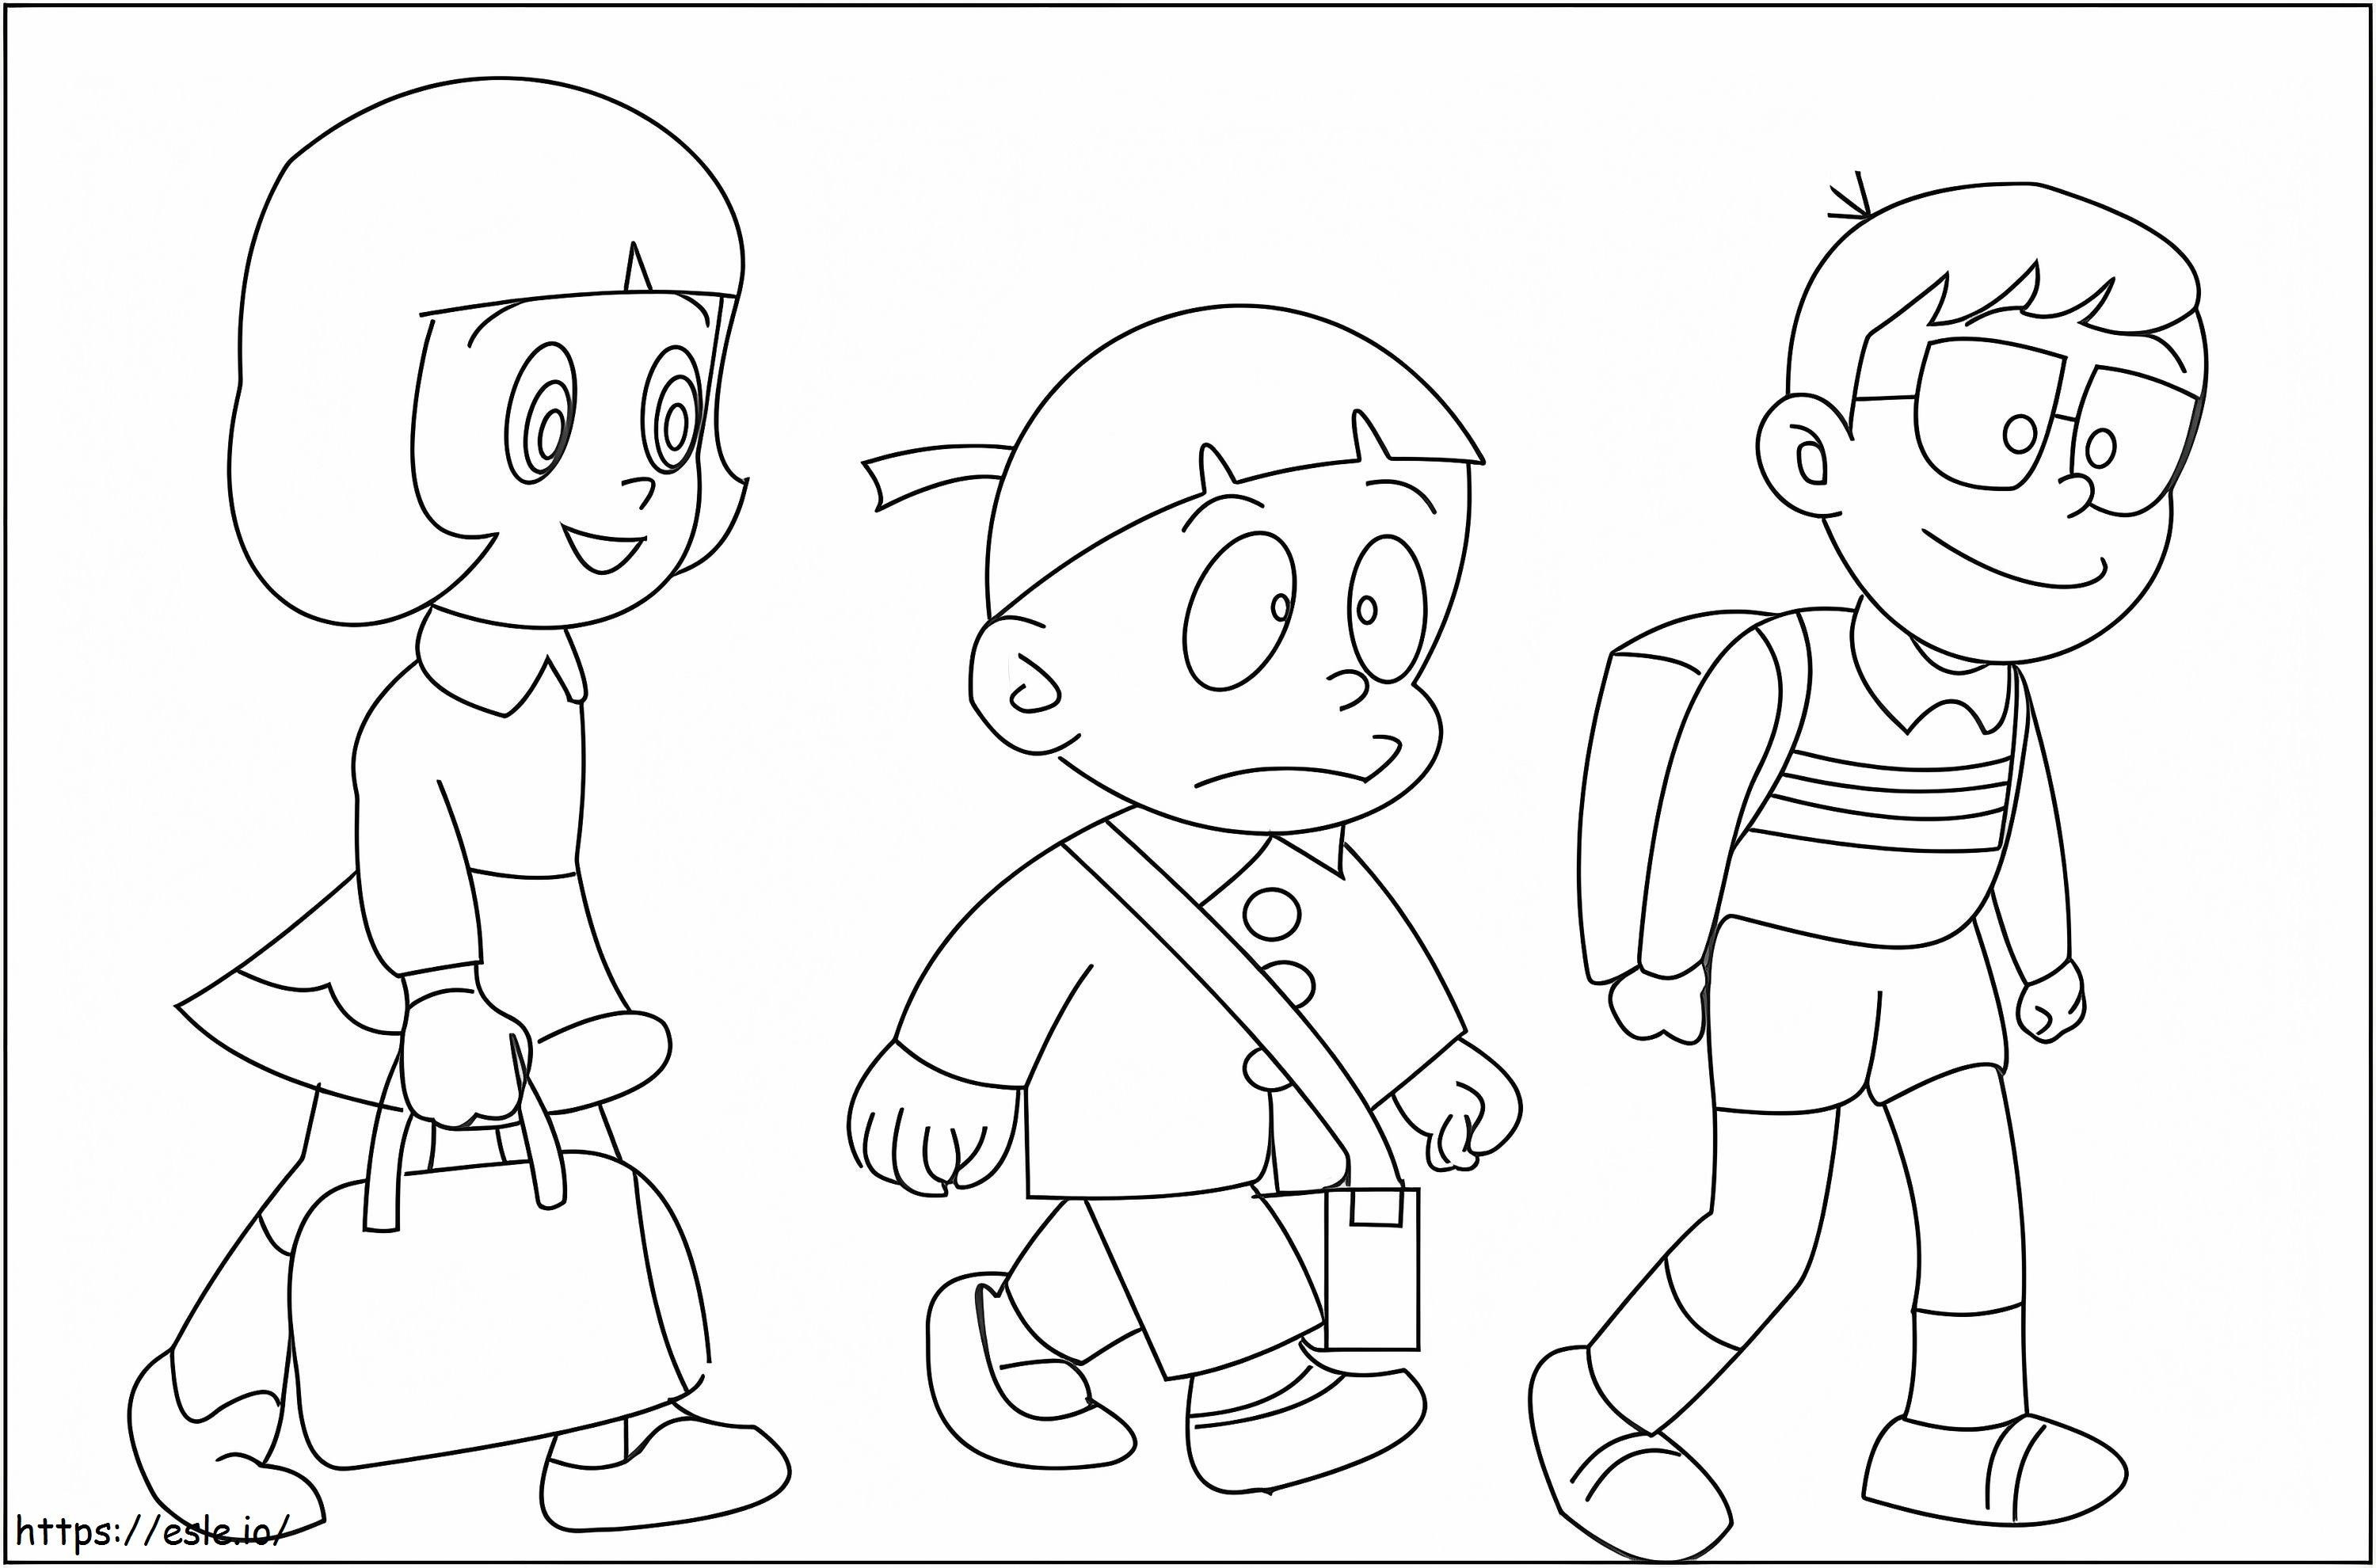 Kenichi And Friends coloring page